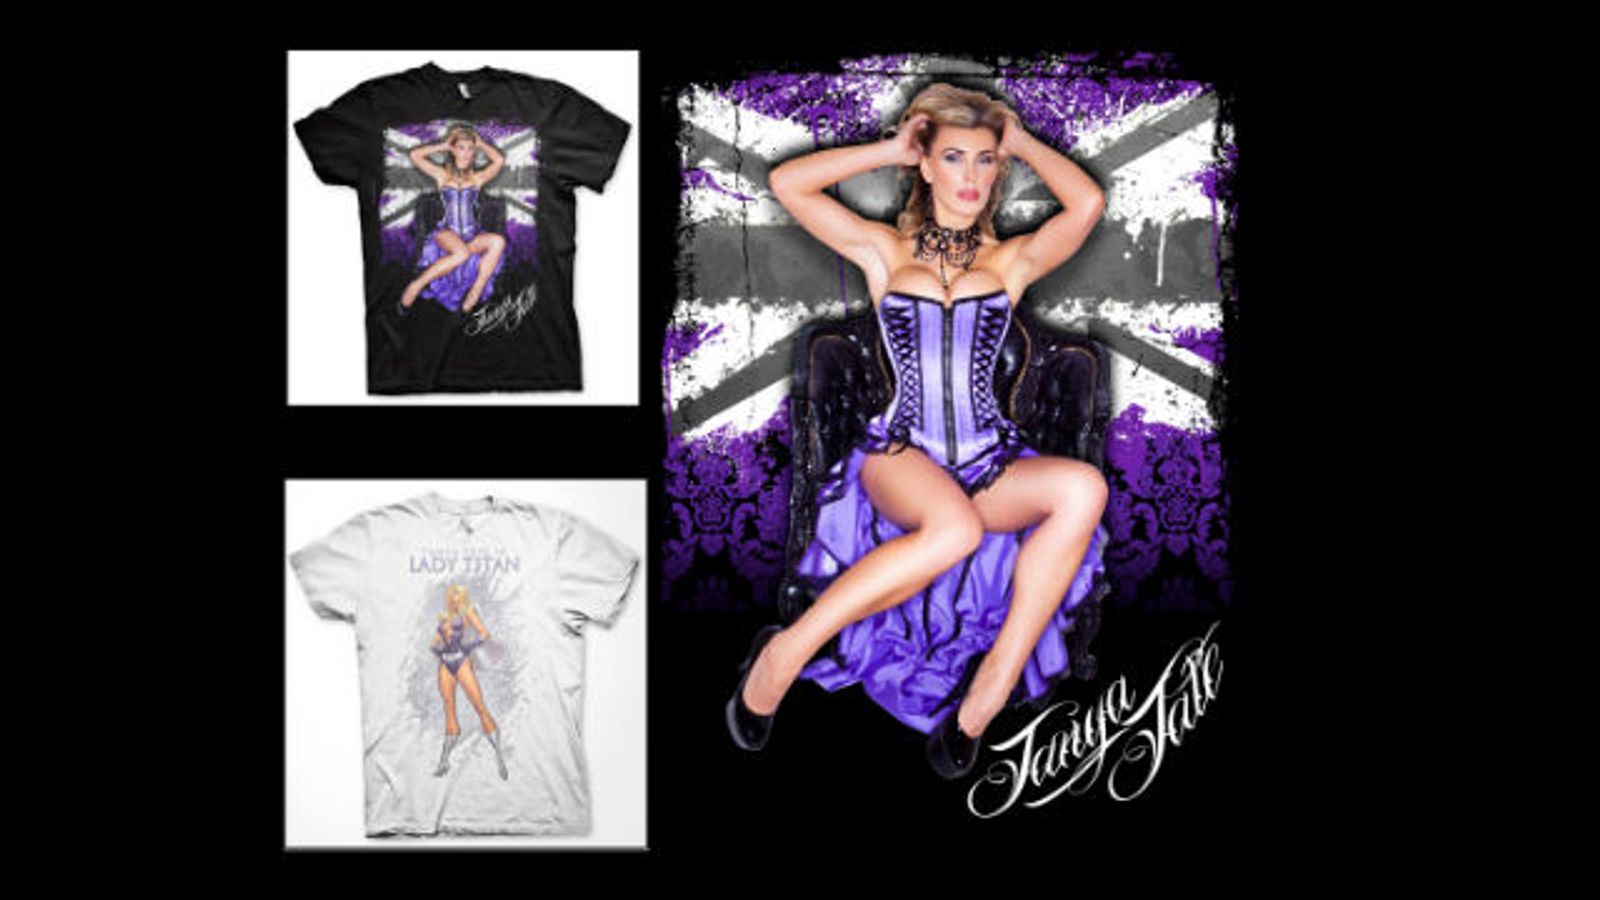 Tanya Tate Launches Line of T-Shirts